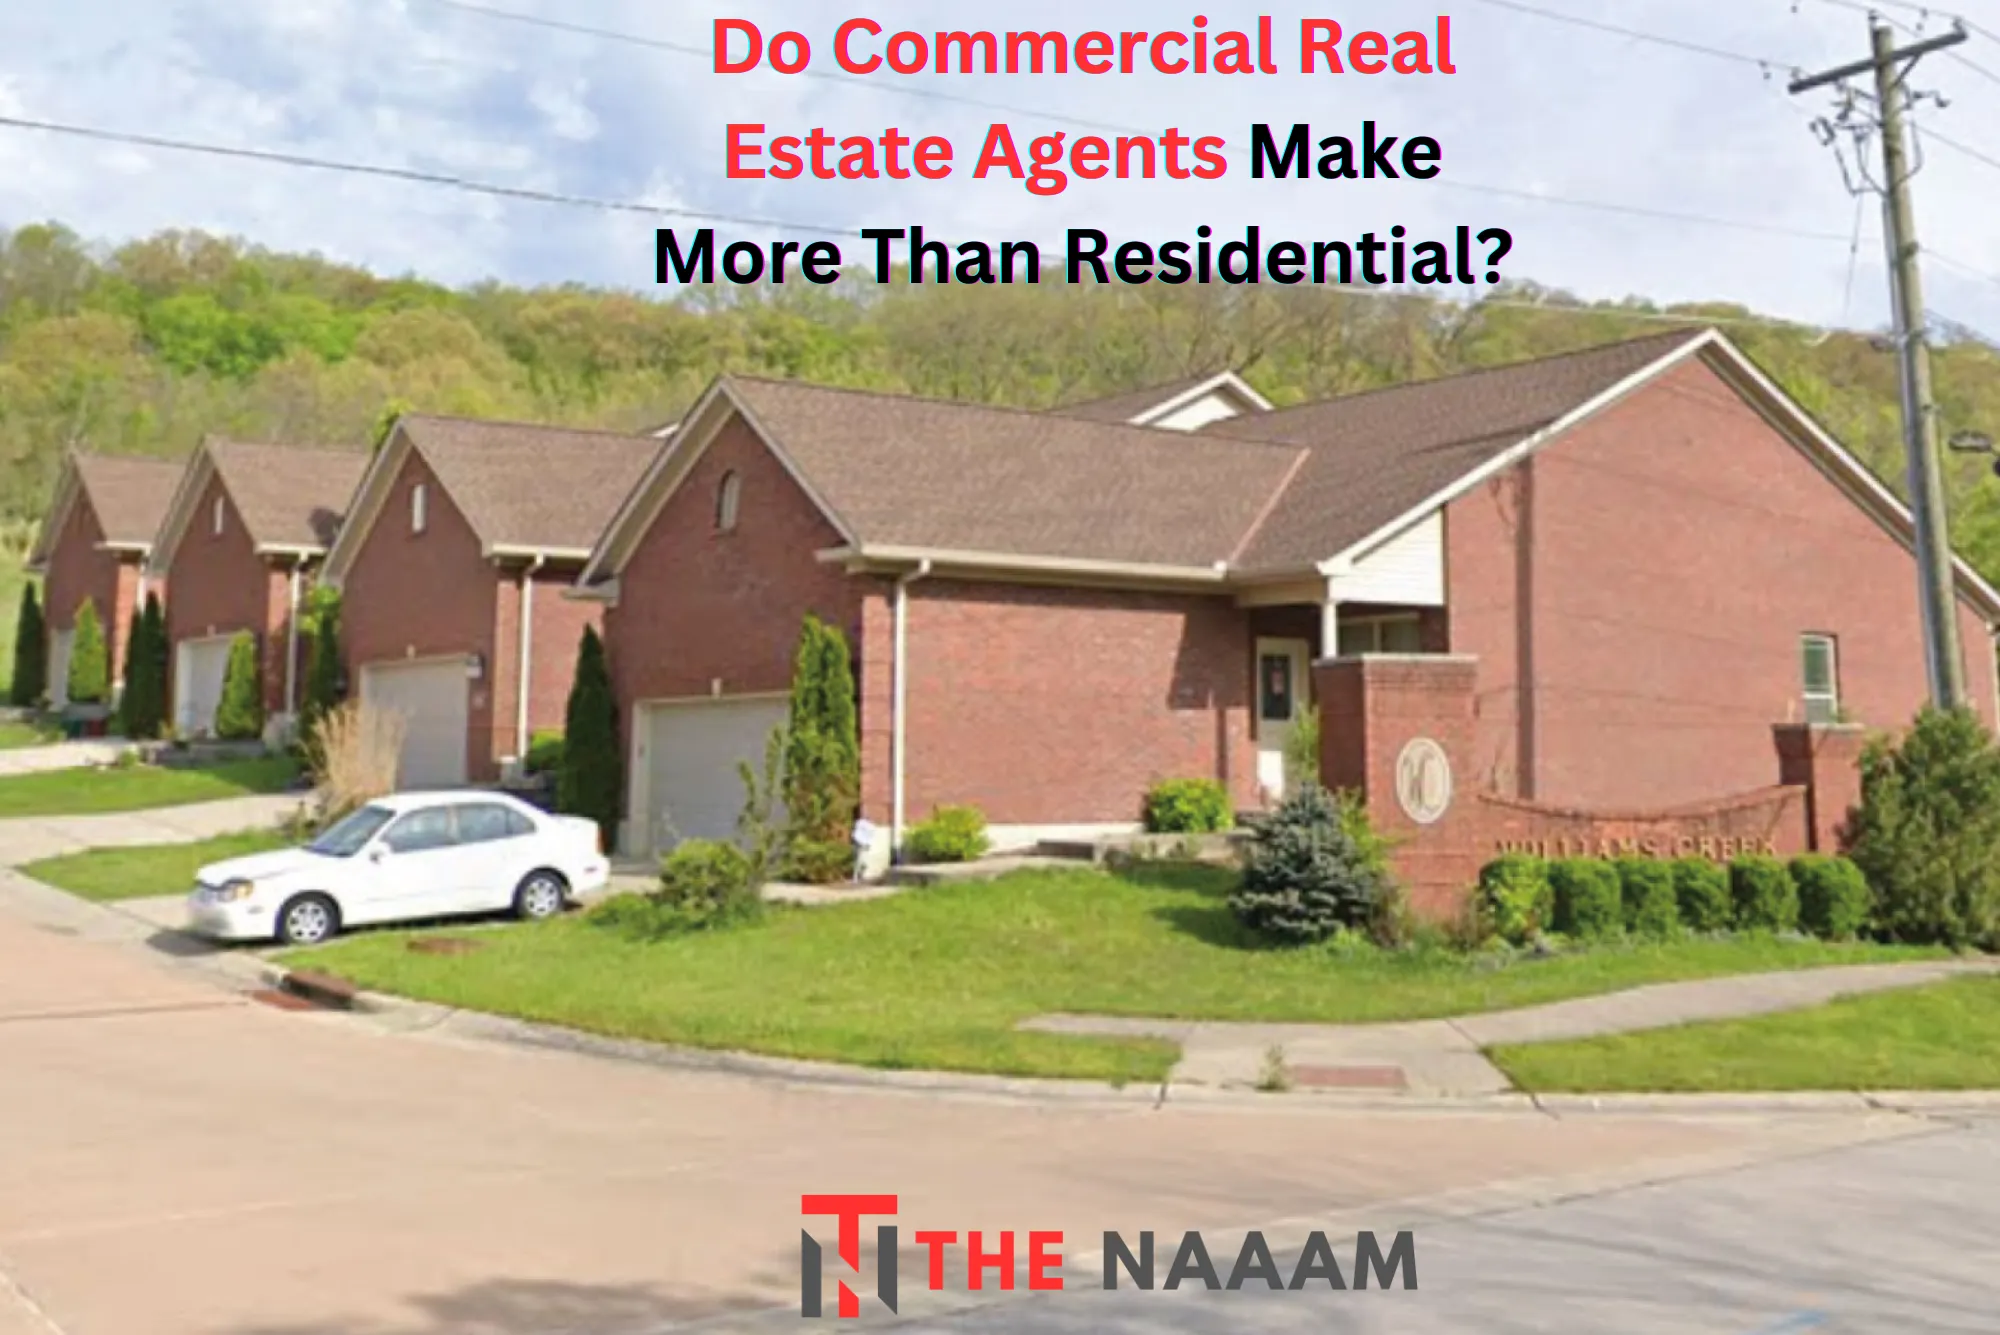 Do Commercial Real Estate Agents Make More Than Residential